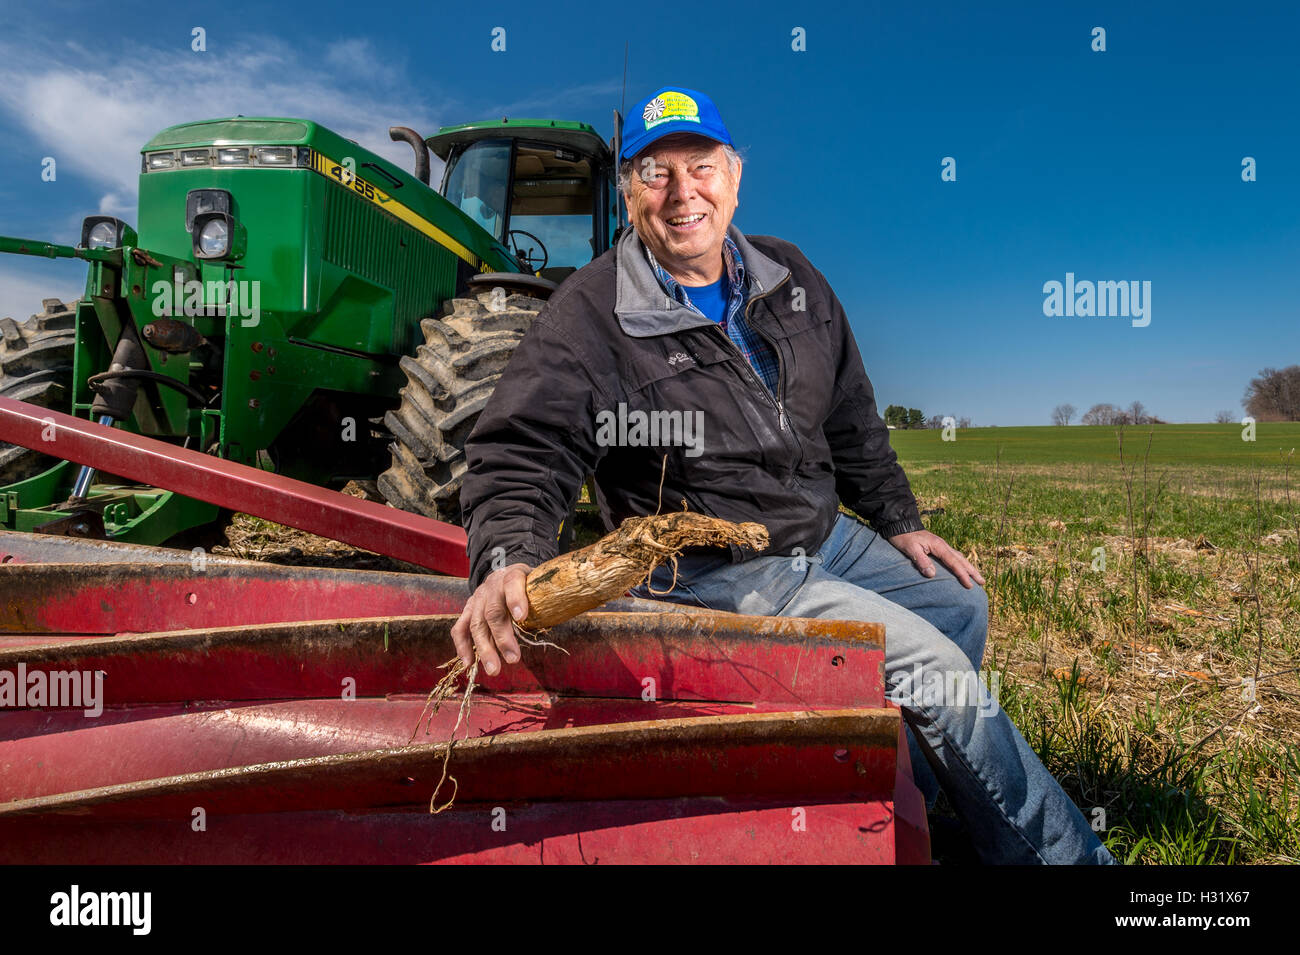 Farmer with Roller Crimper on a John Deere Tractor Stock Photo